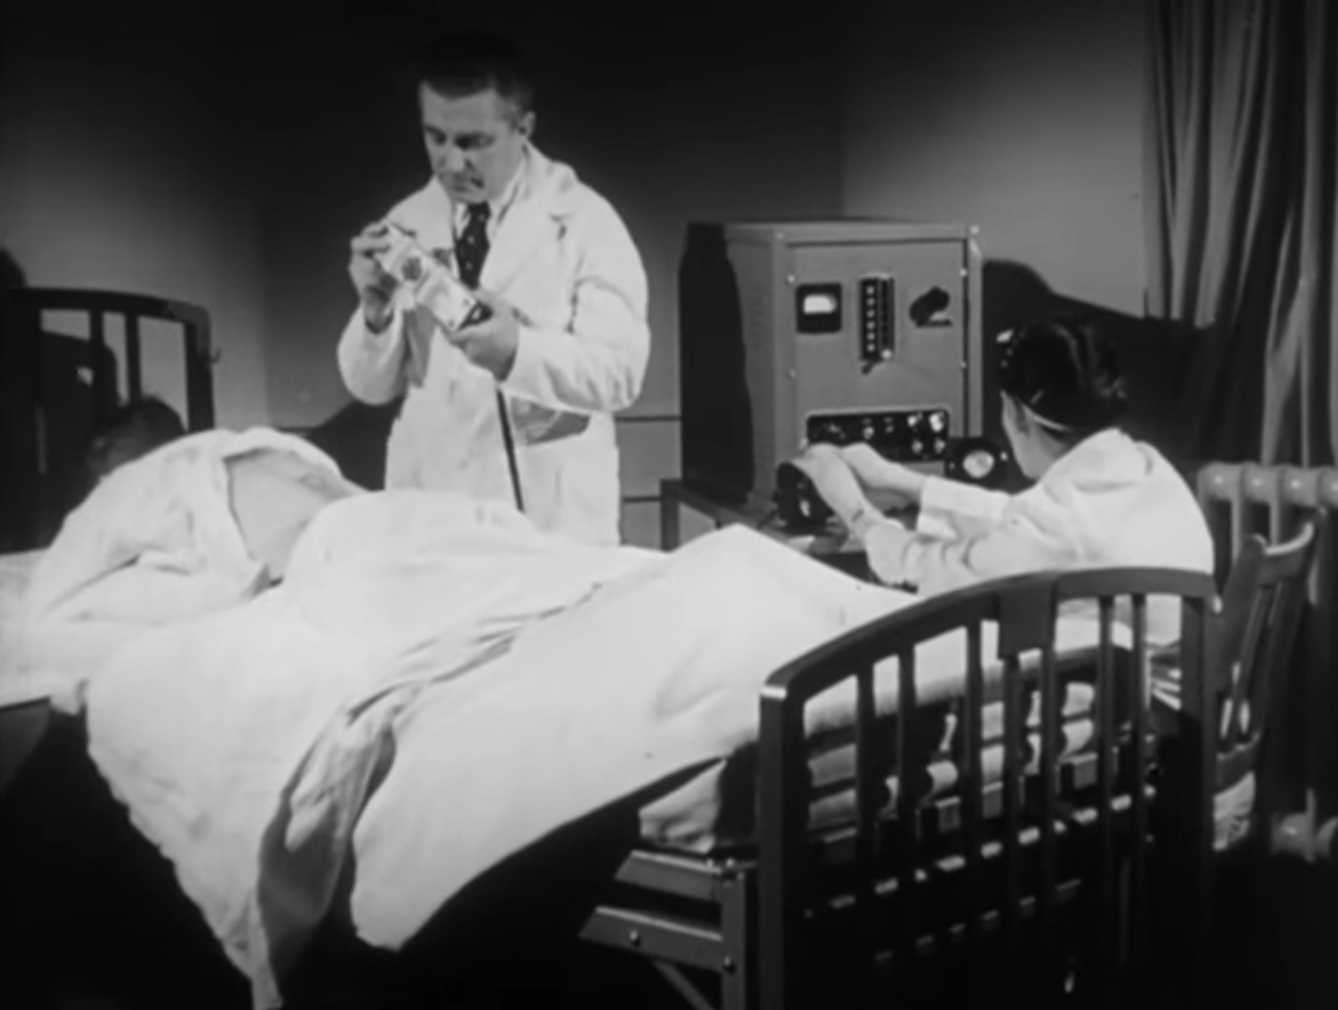 Image of a patient lying on his stomach in bed with his shirt lifted to expose his back. A man wearing a lab coat stands over him and a woman wearing a lab coat operates a box-like machine next to the bed.